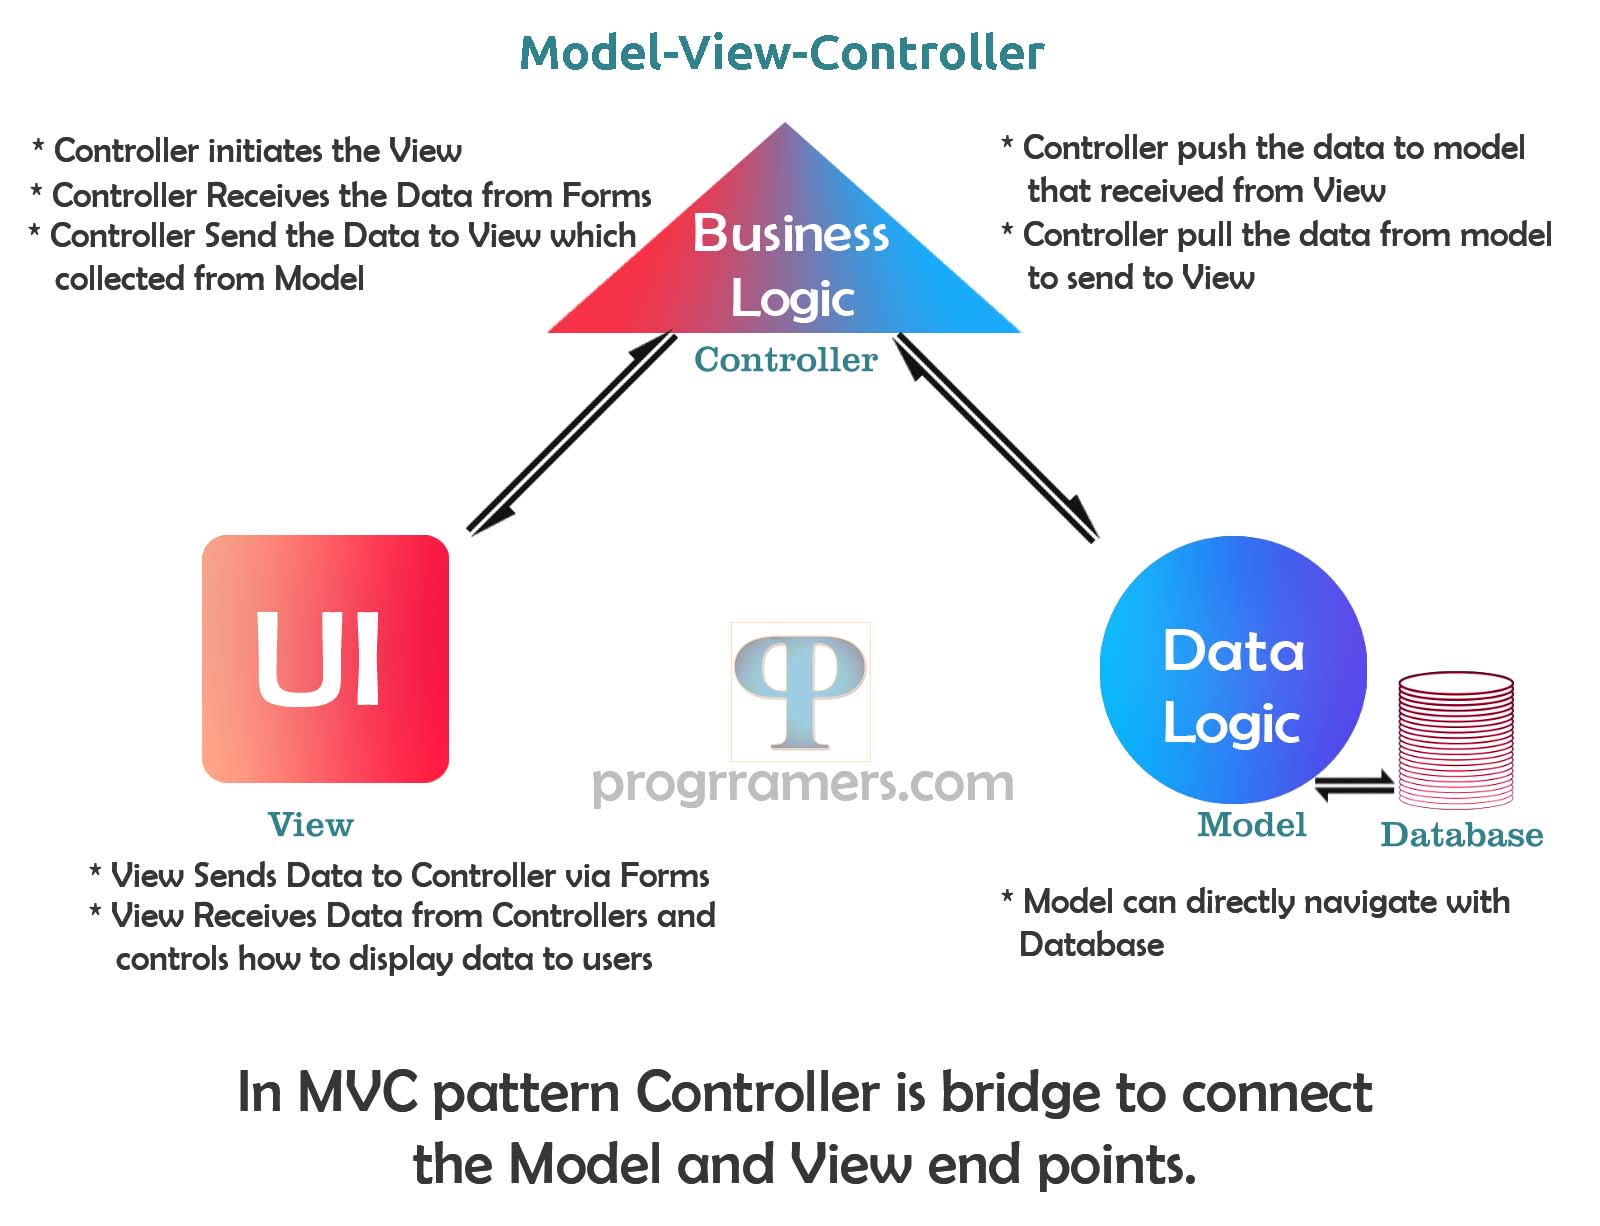 What is MVC?